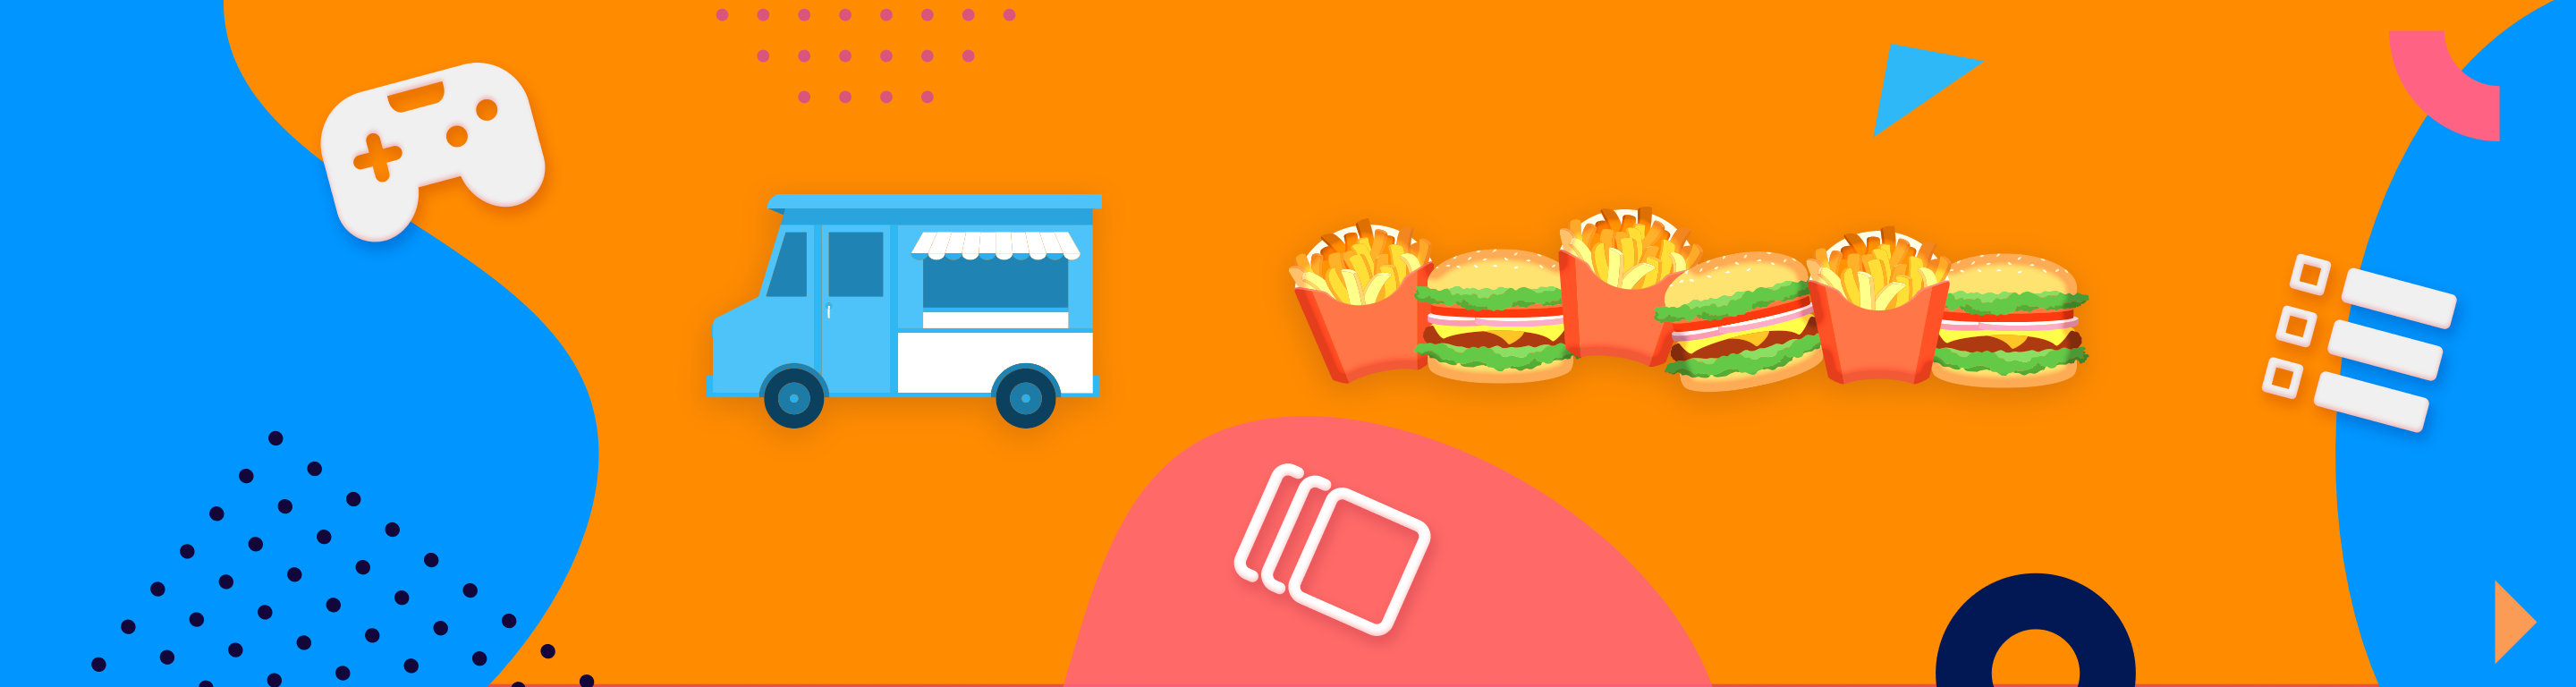 Blue food truck with burgers and fries in the center, MobLab Module, Survey, and Game icons around